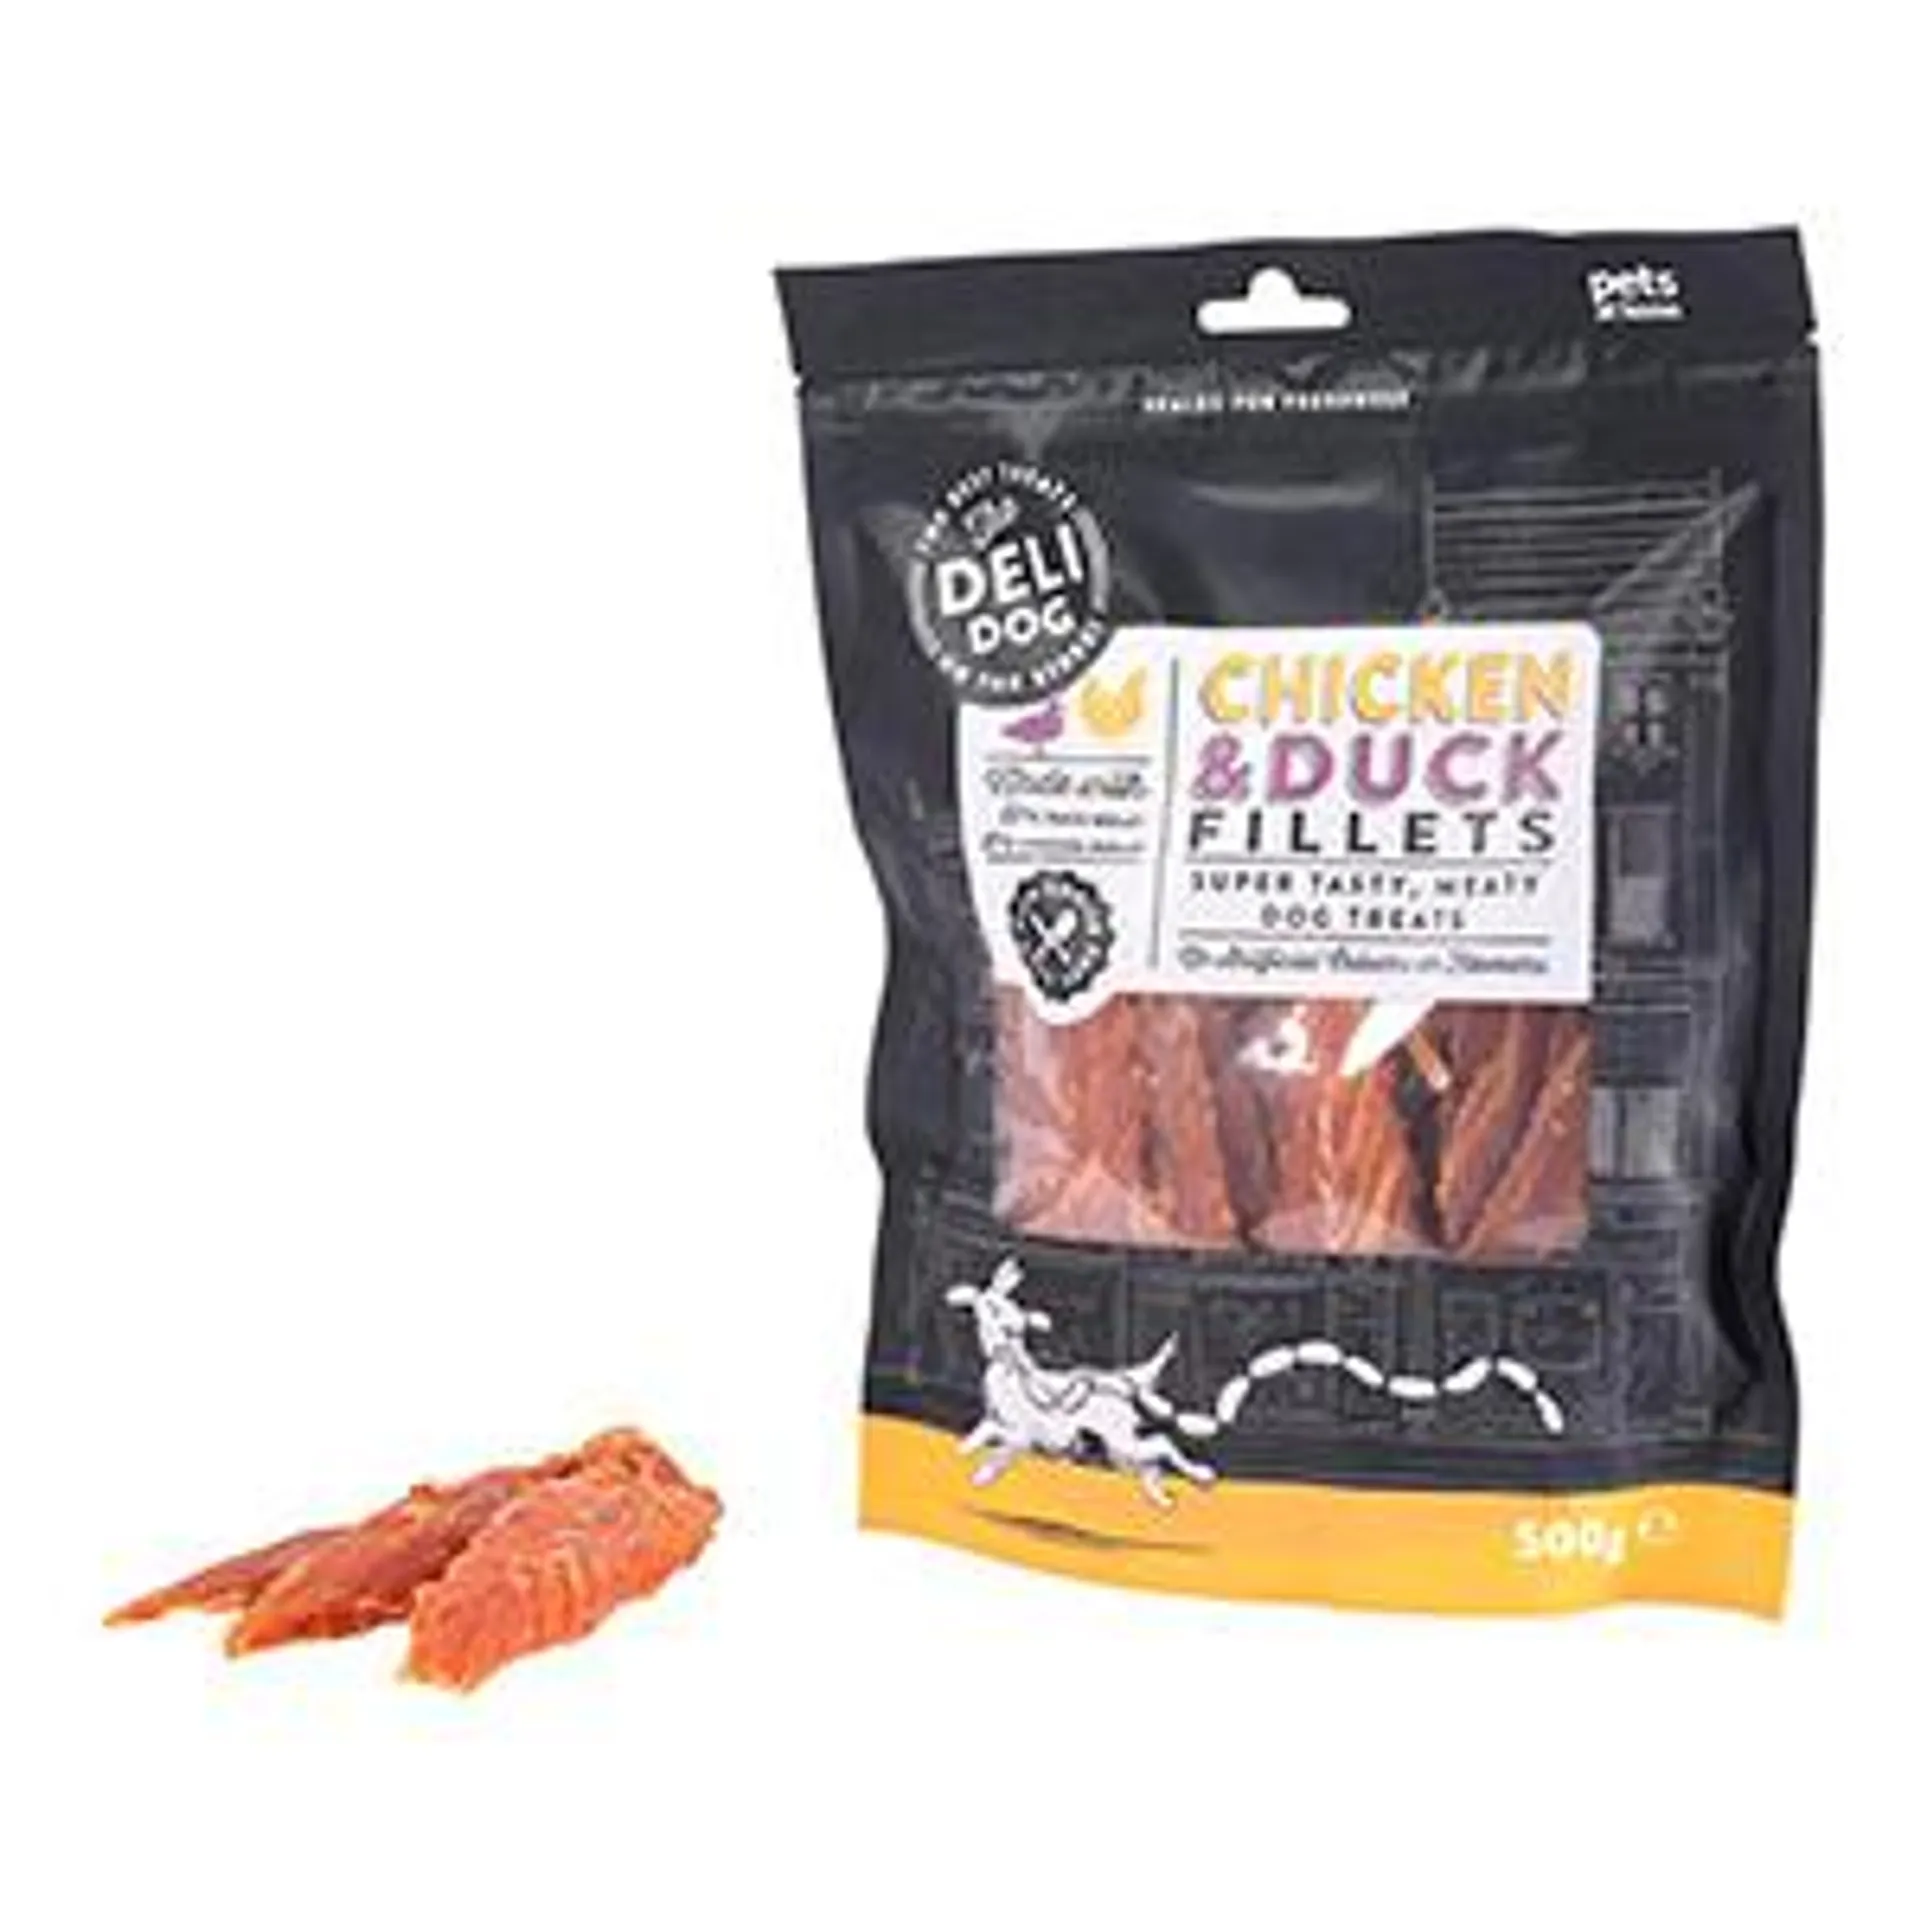 Pets at Home The Deli Dog Chicken and Duck Fillet Adult Dog Treats 500g